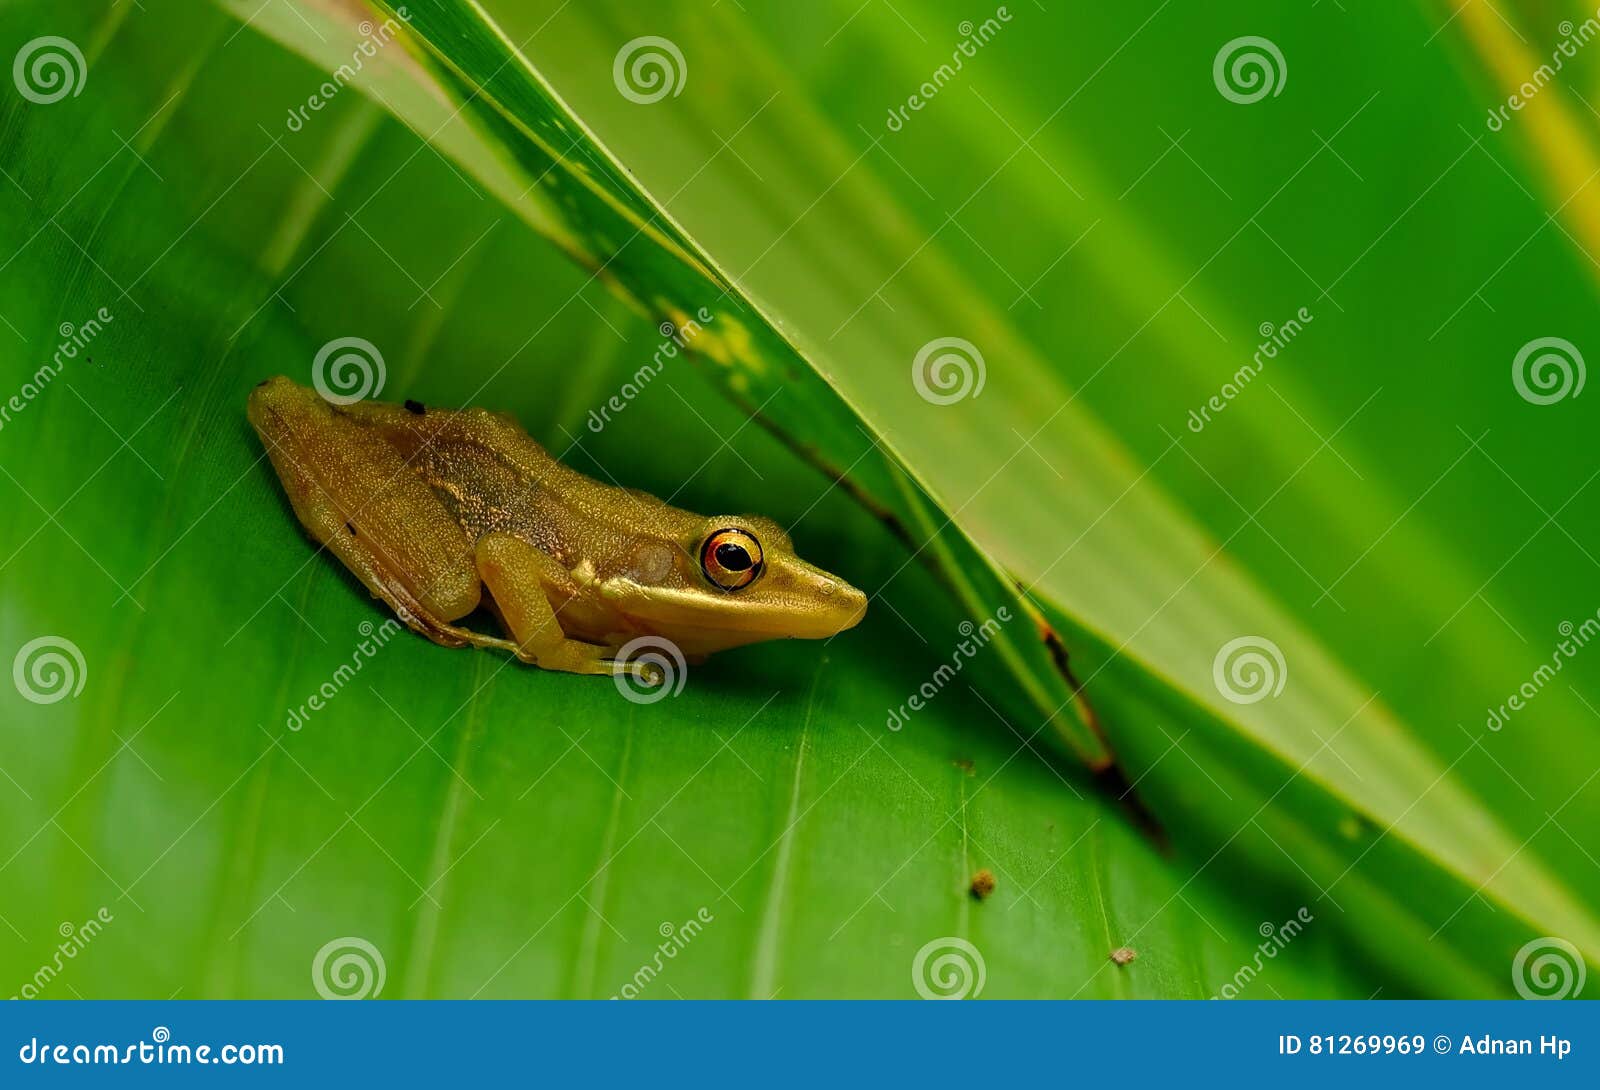 A Little Brown Frog Hiding in Green Banana Stock Image - Image of leaf,  animal: 81269969